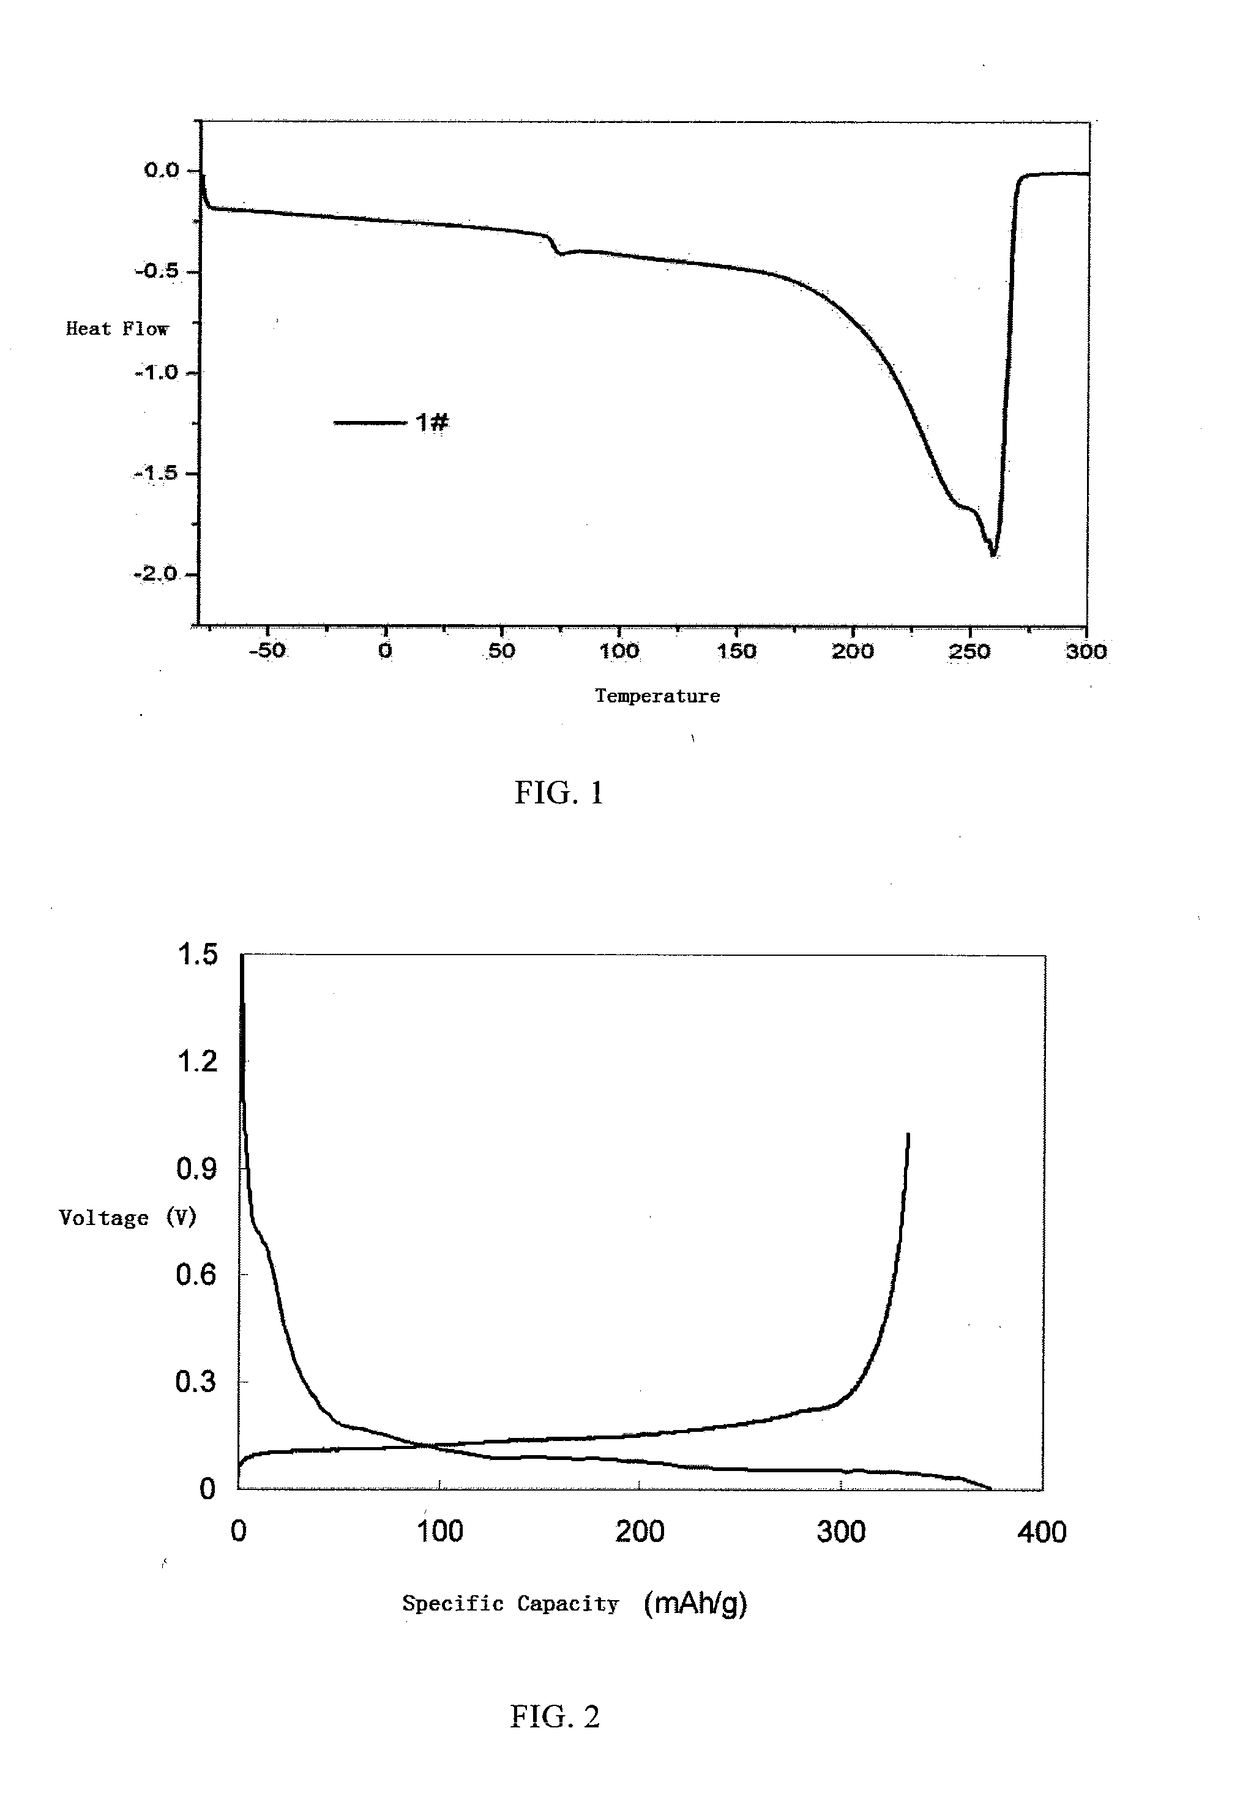 Fluorine-Substituted Propylene Carbonate-Based Electrolytic Solution and Lithium-Ion Battery